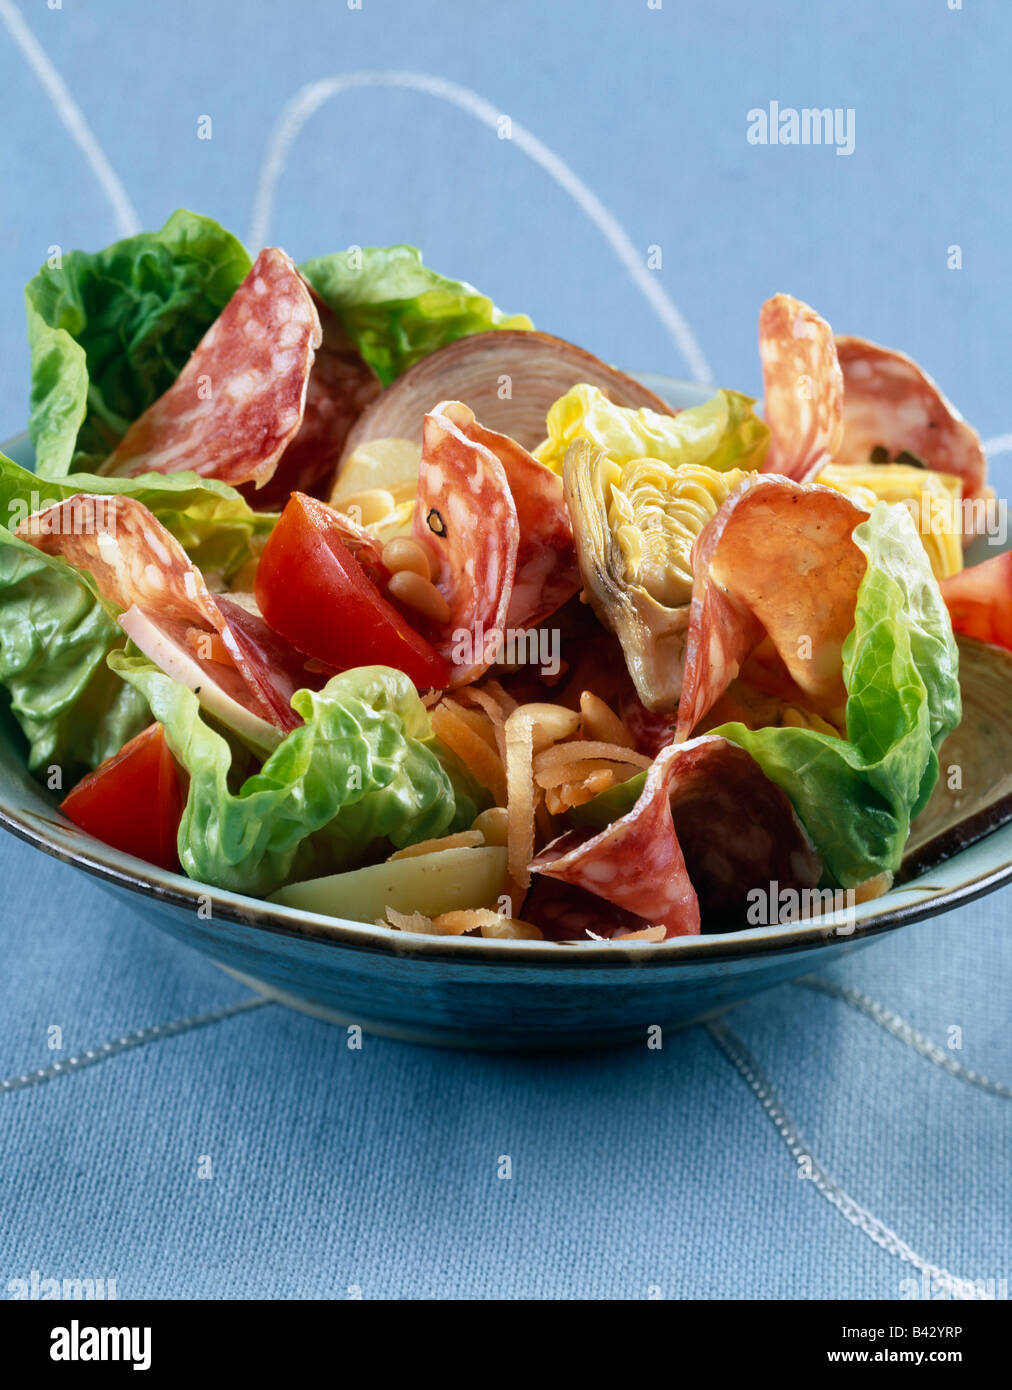 cooked meats salad Stock Photo